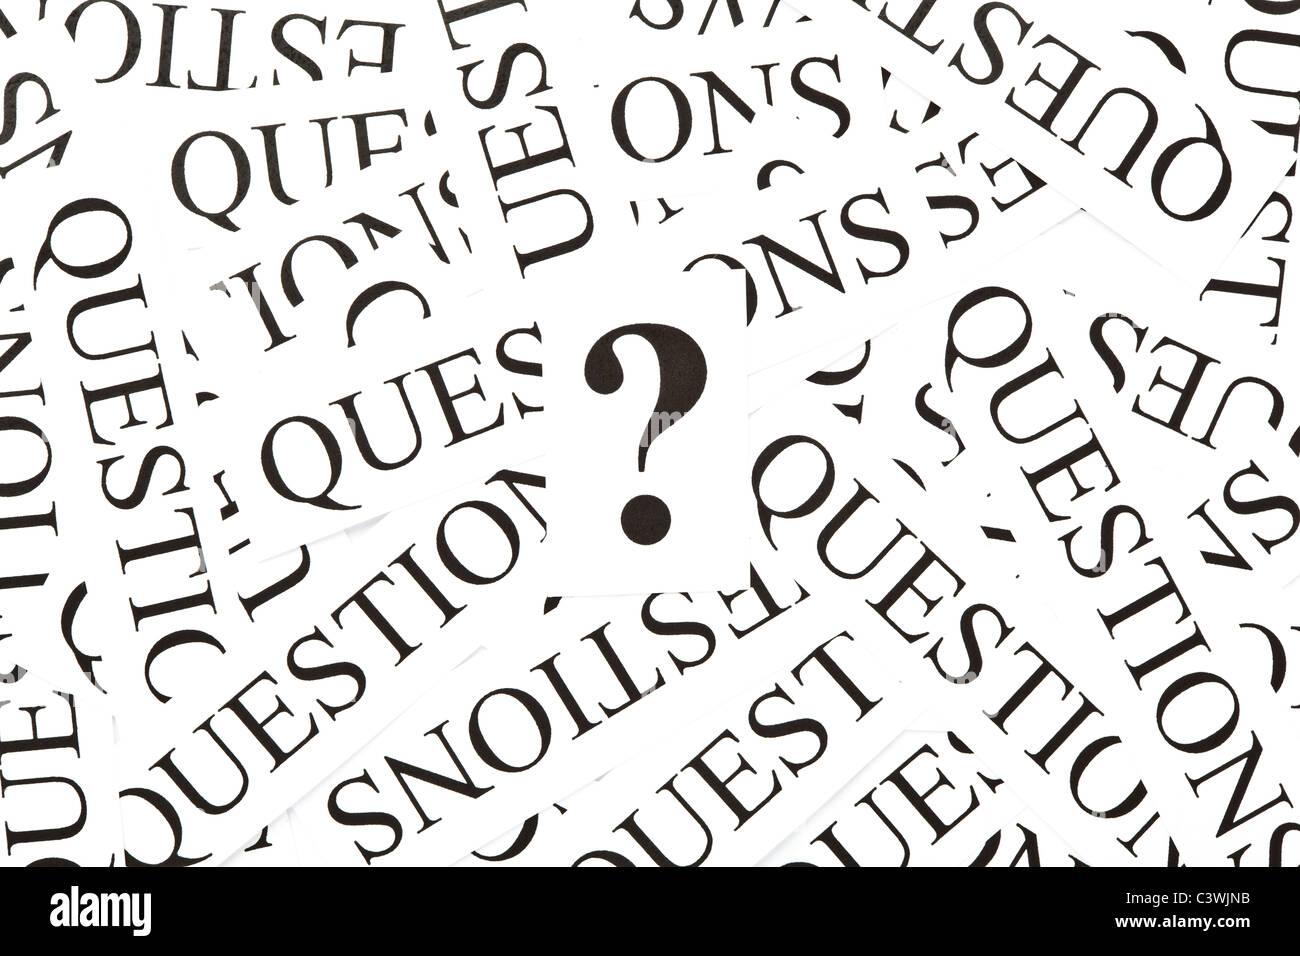 Question mark on a background of many printed paper 'Questions' Stock Photo